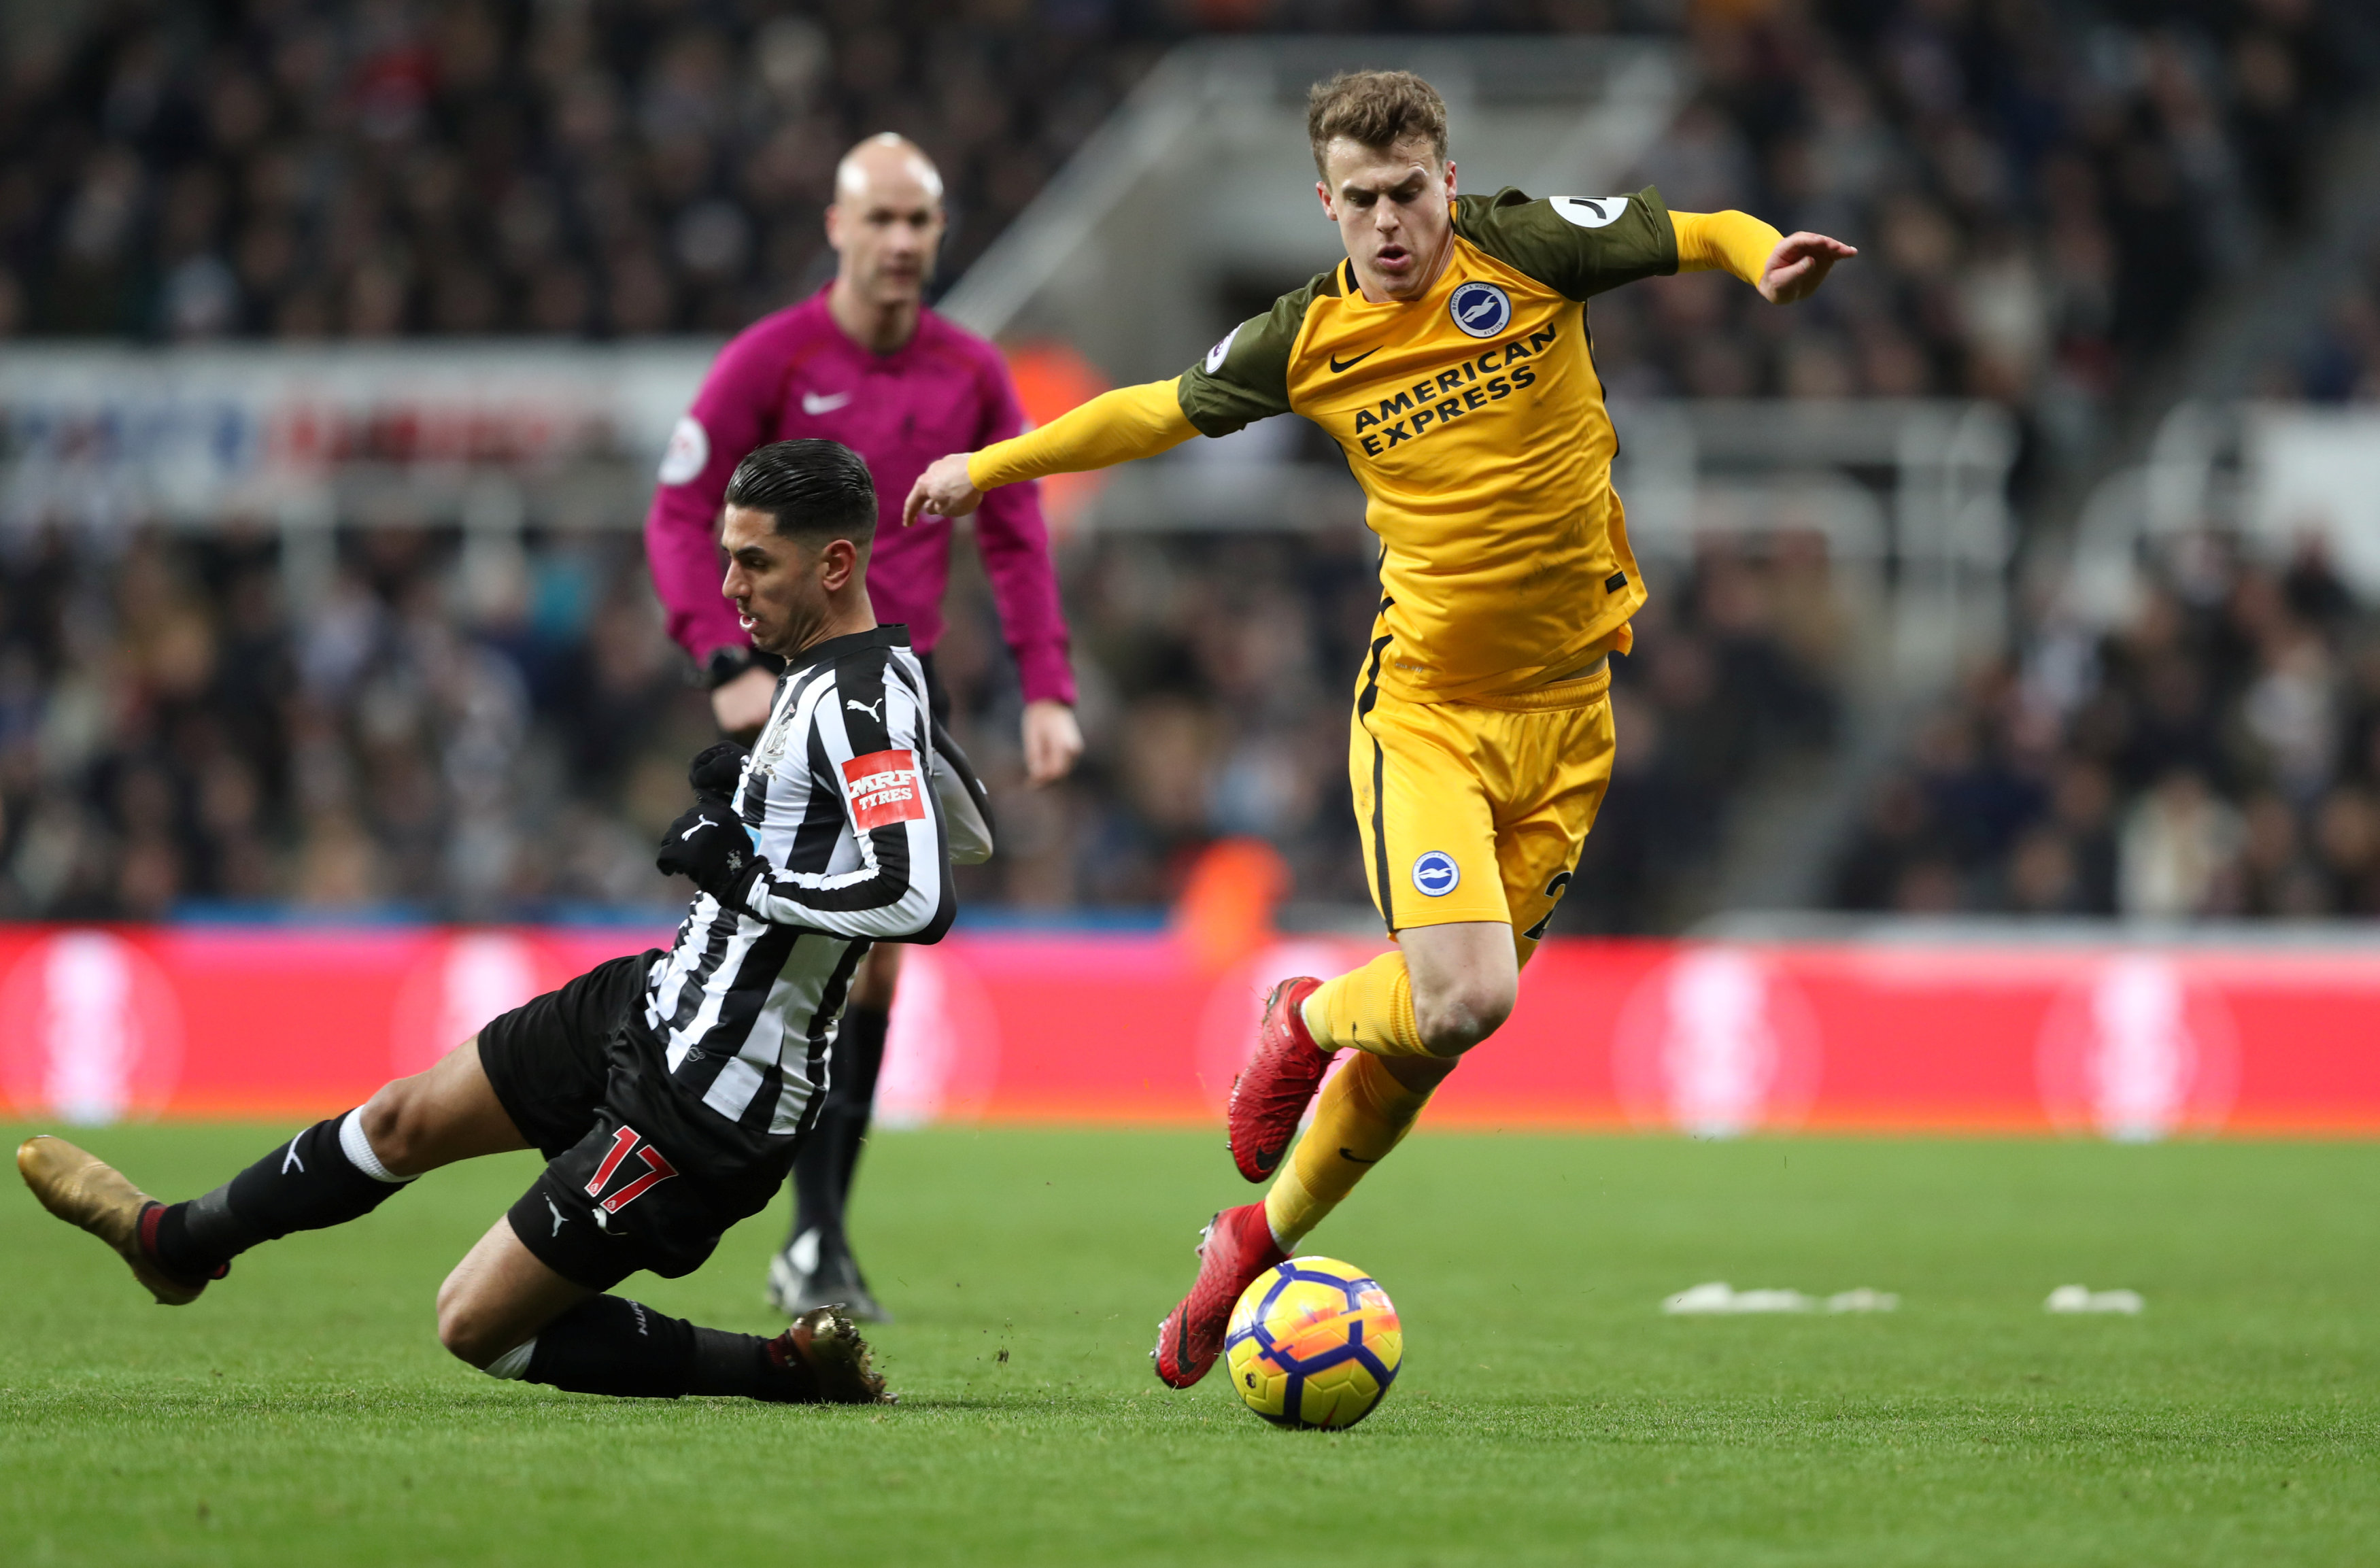 Football: Newcastle held to 0-0 draw by Brighton